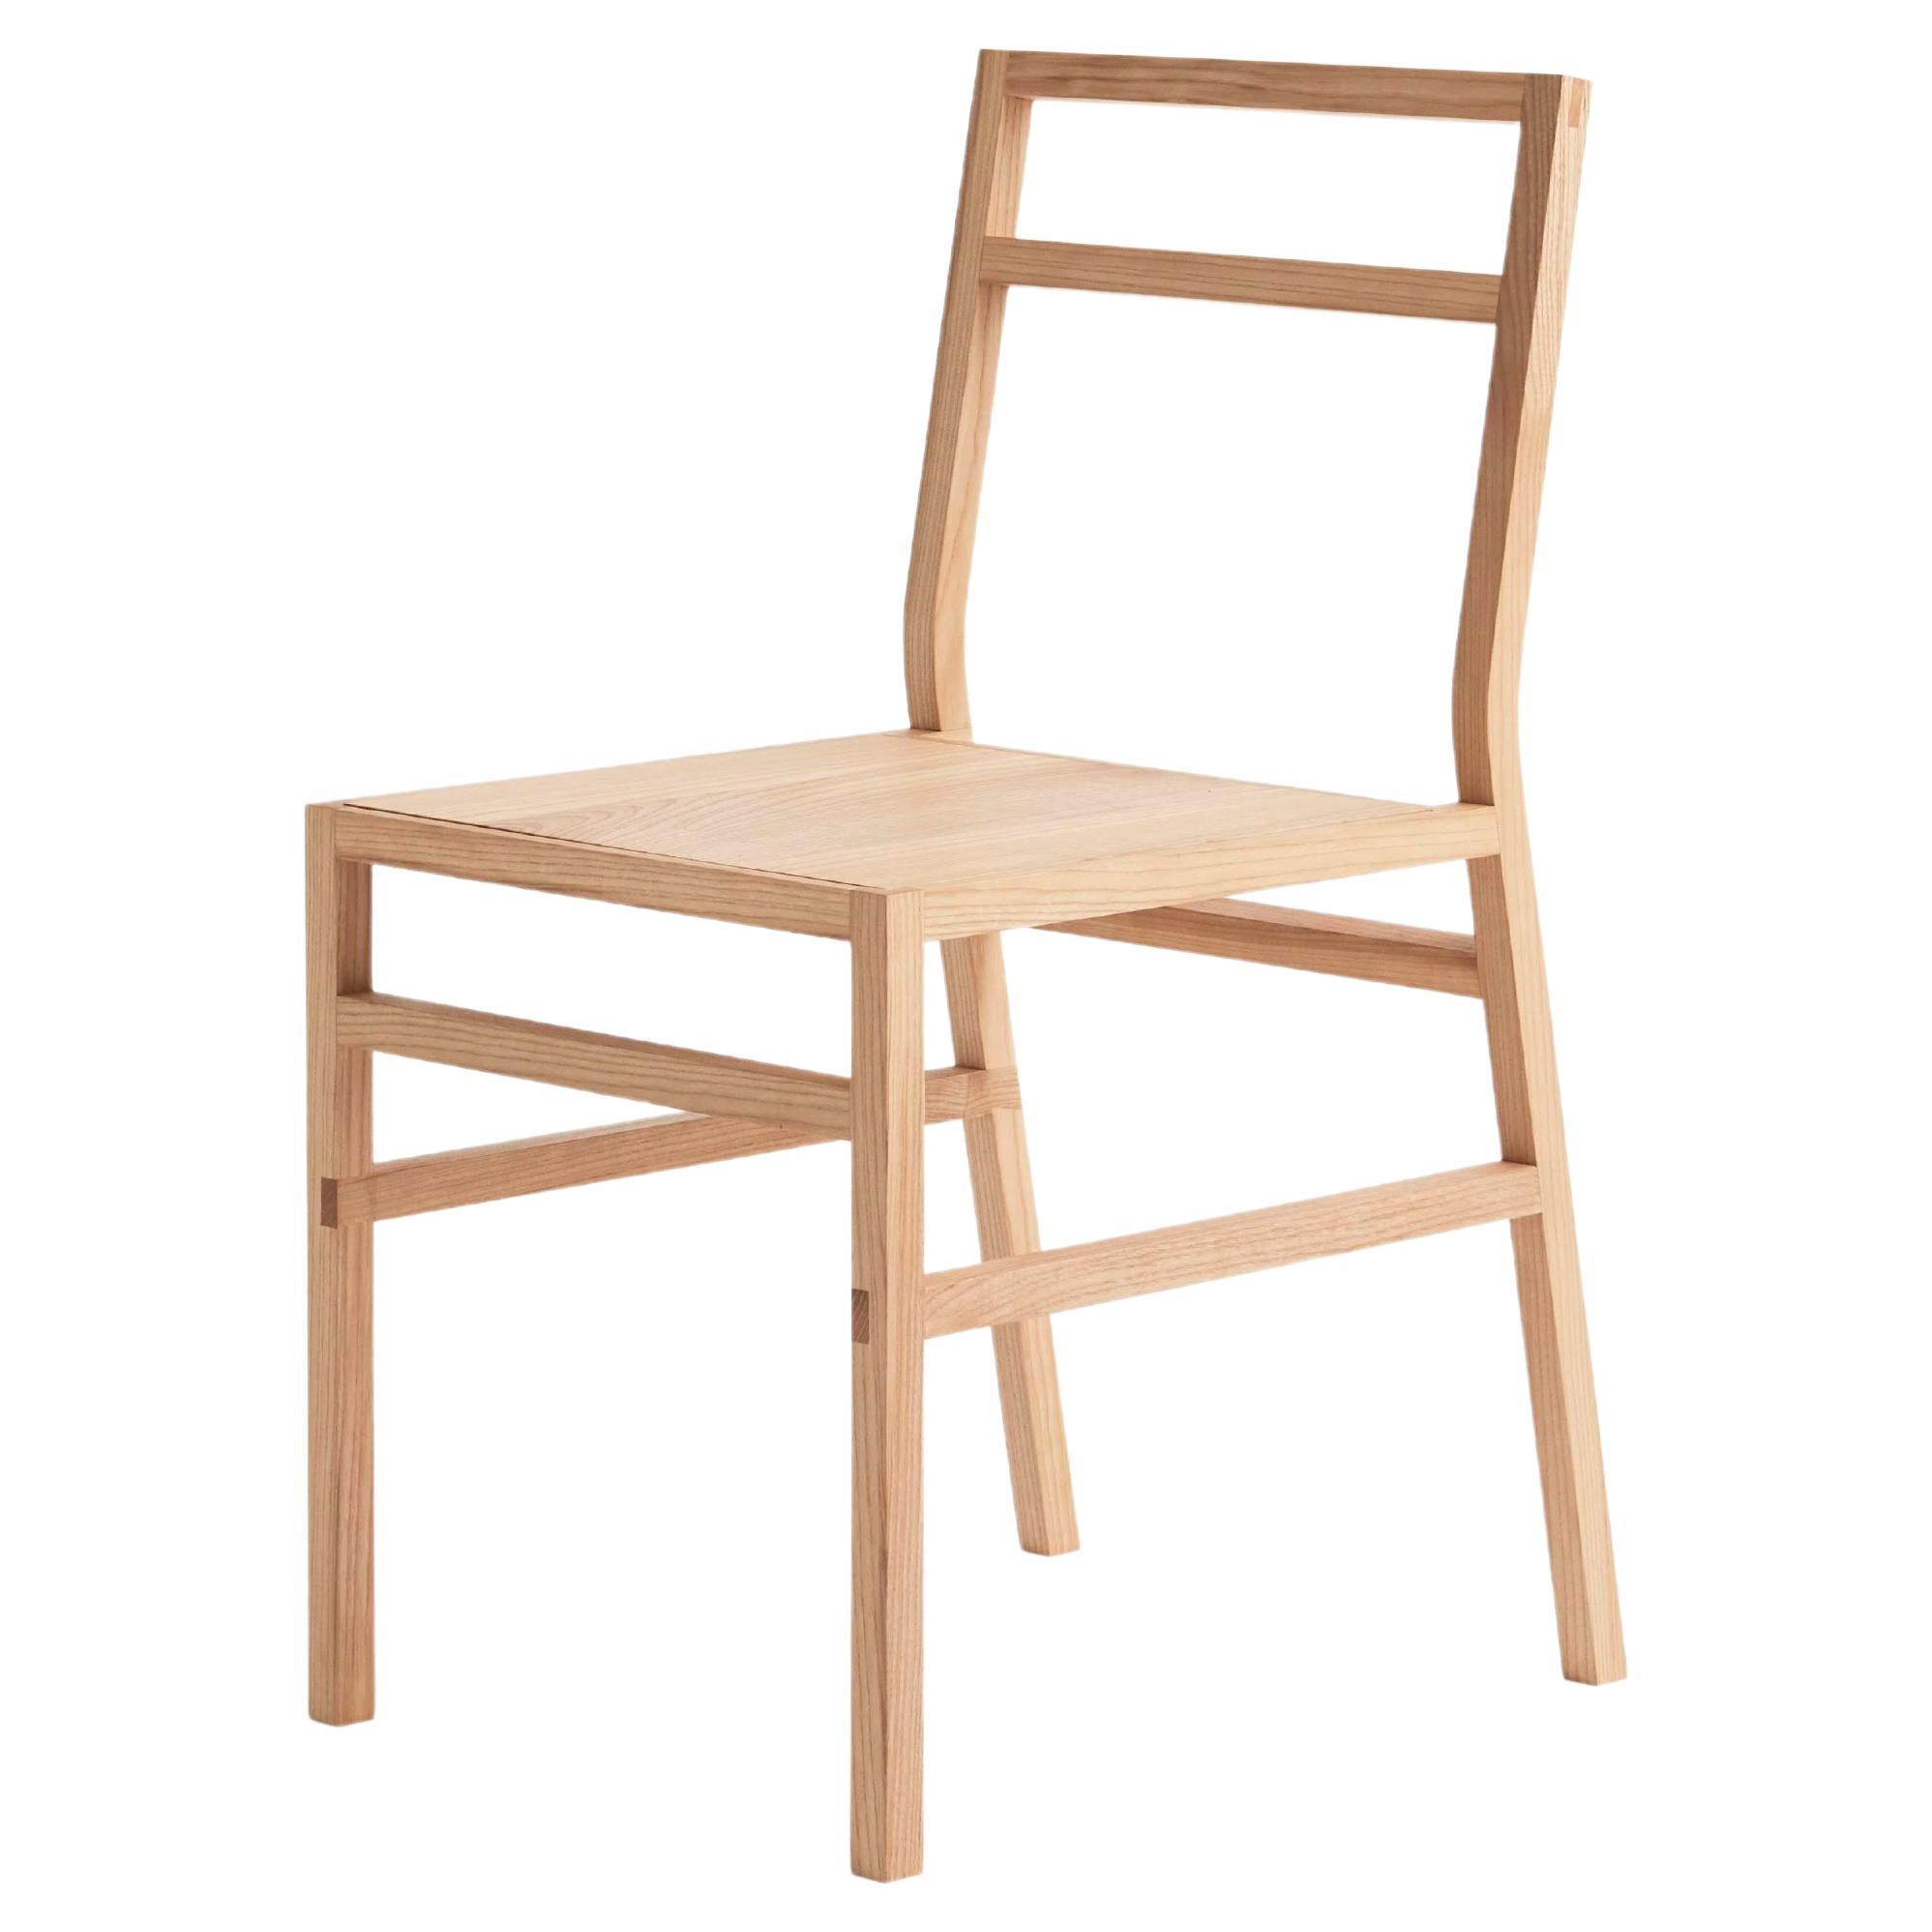 Organic Modern Dining Chair, Solid Ash, Wood, Handmade by Loose Fit, UK